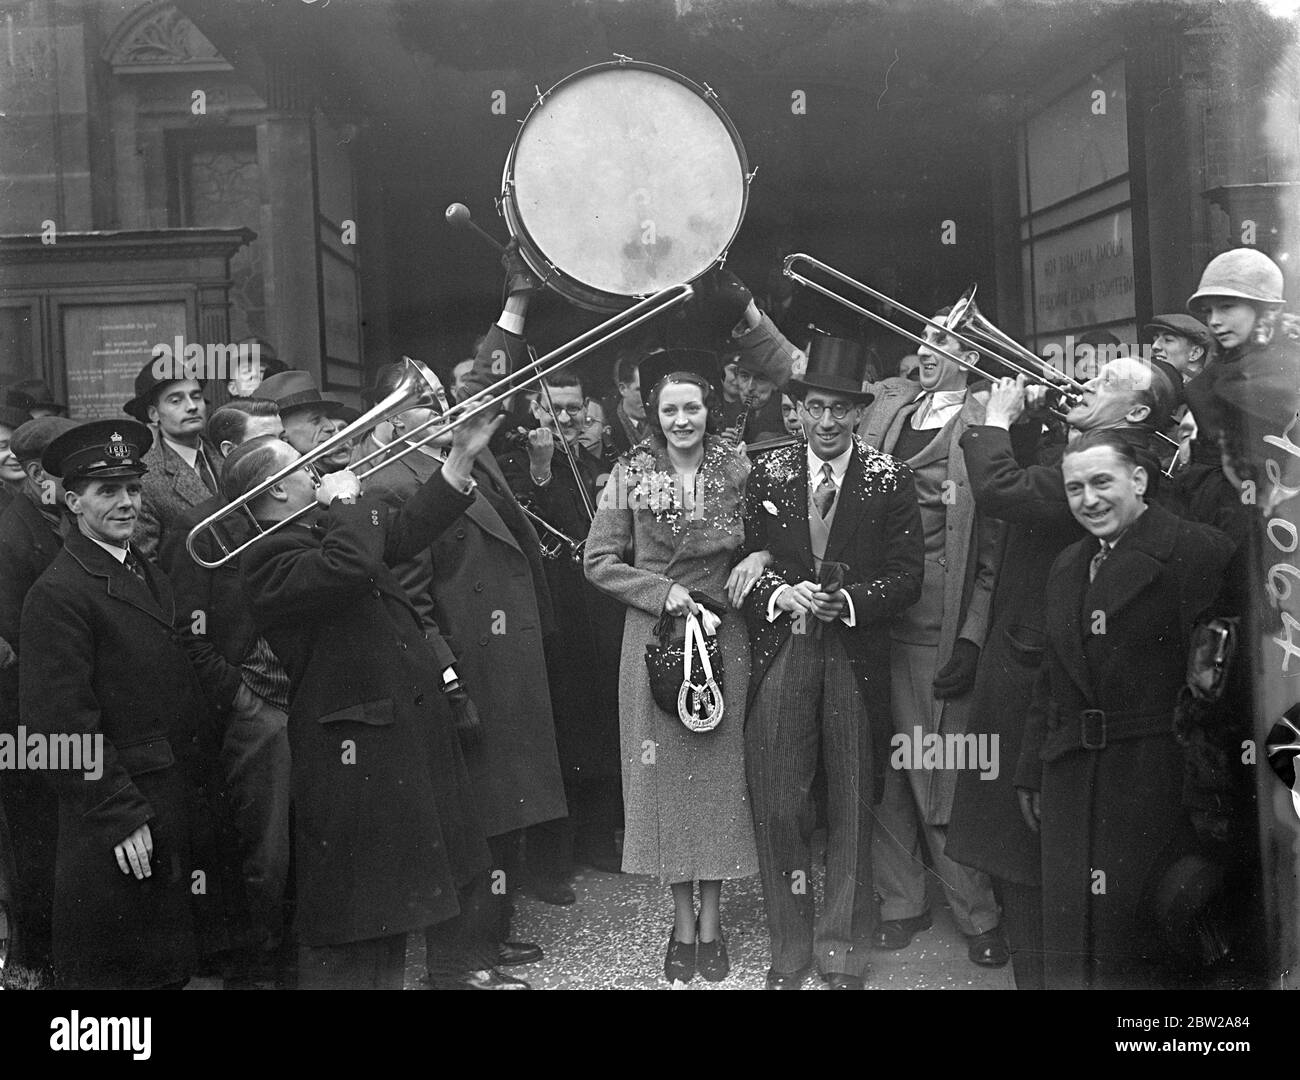 Alfred Van Dam married at Caxton Hall, band performed guard of honour. The bridegroom's band formed a guard of honour outside Caxton Hall register office, London, when Mr Alfred Van Dam, leader of the band at the Trocadero cinema, Elephant and Castle, was married to 27-year-old miss Dorothy Gascoyne of Kentish Town, London. The bride met her future husband after being 'discovered' by Carroll lavis of the BBC's amateur hour. Photo shows, the bride and groom after the ceremony. 18 December 1937 Stock Photo